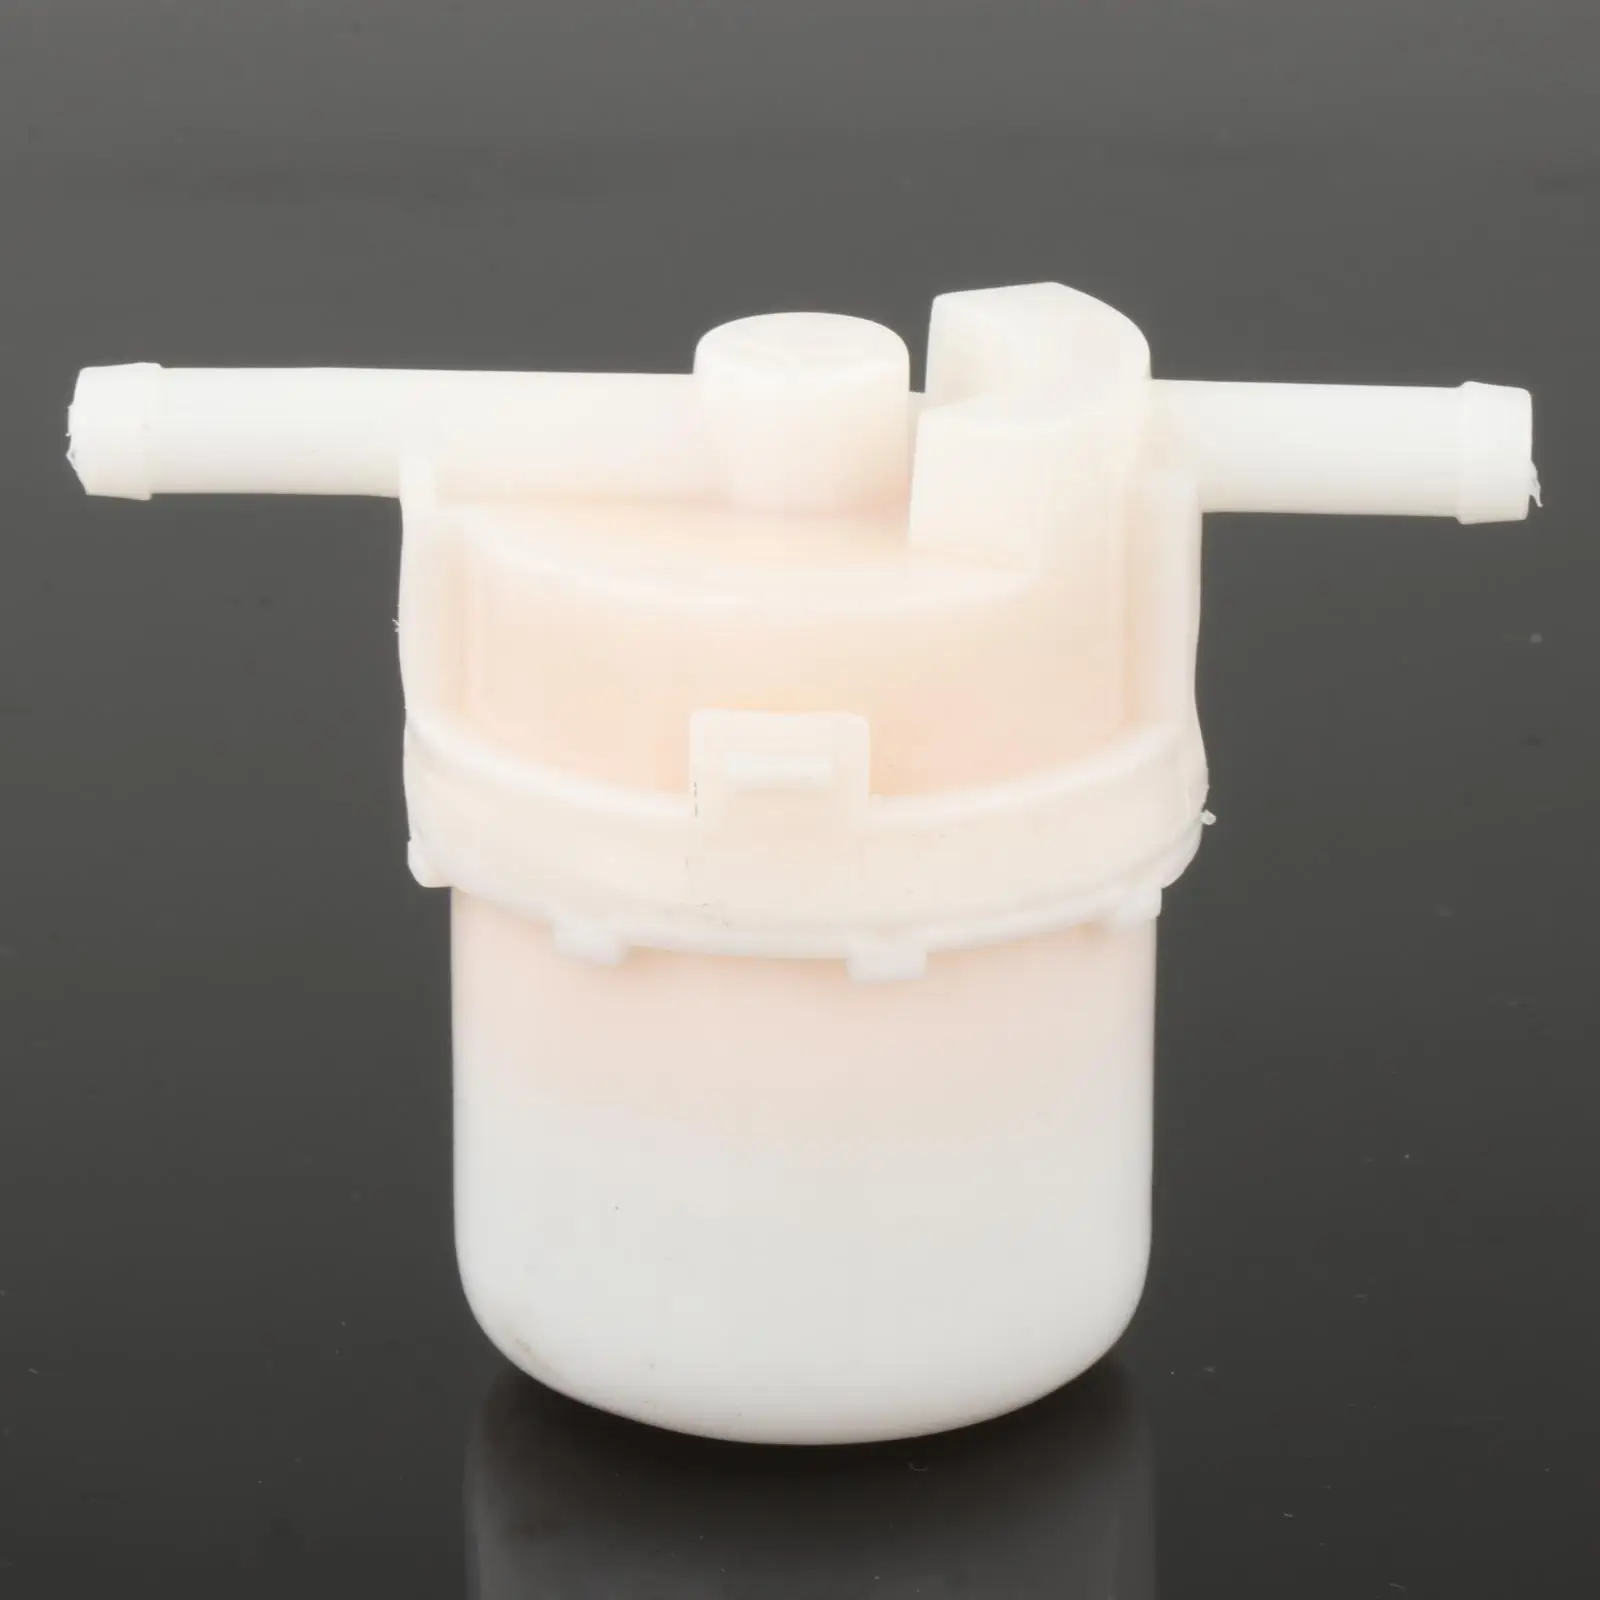 Fuel Filter 16900--004 Replaces  Fits for Honda Outboard Parts 35, 40, 45, 50, 75, 90 Professional Easy to Install